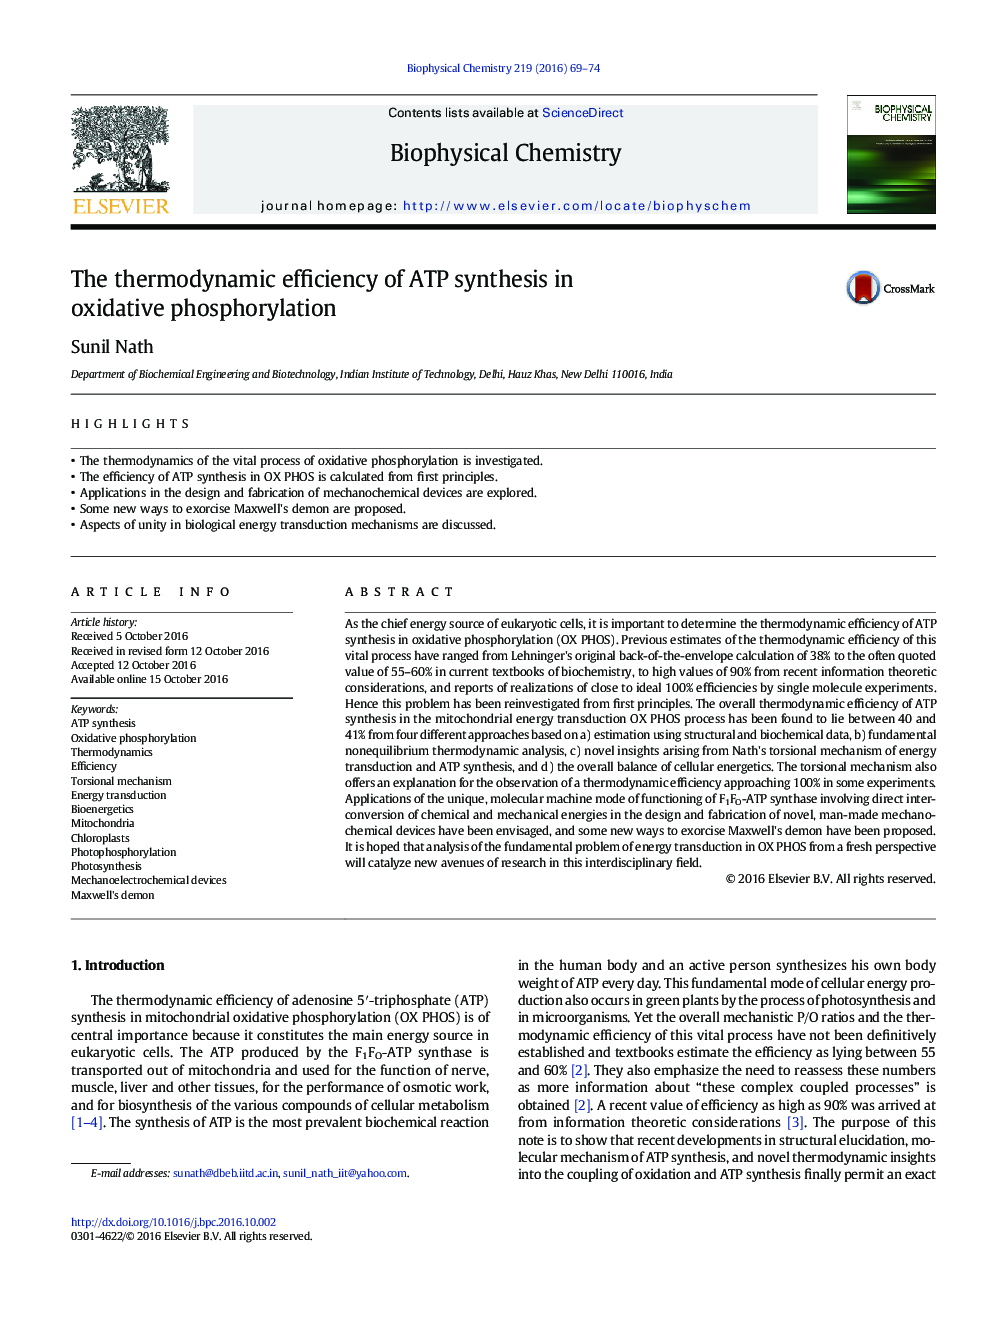 The thermodynamic efficiency of ATP synthesis in oxidative phosphorylation